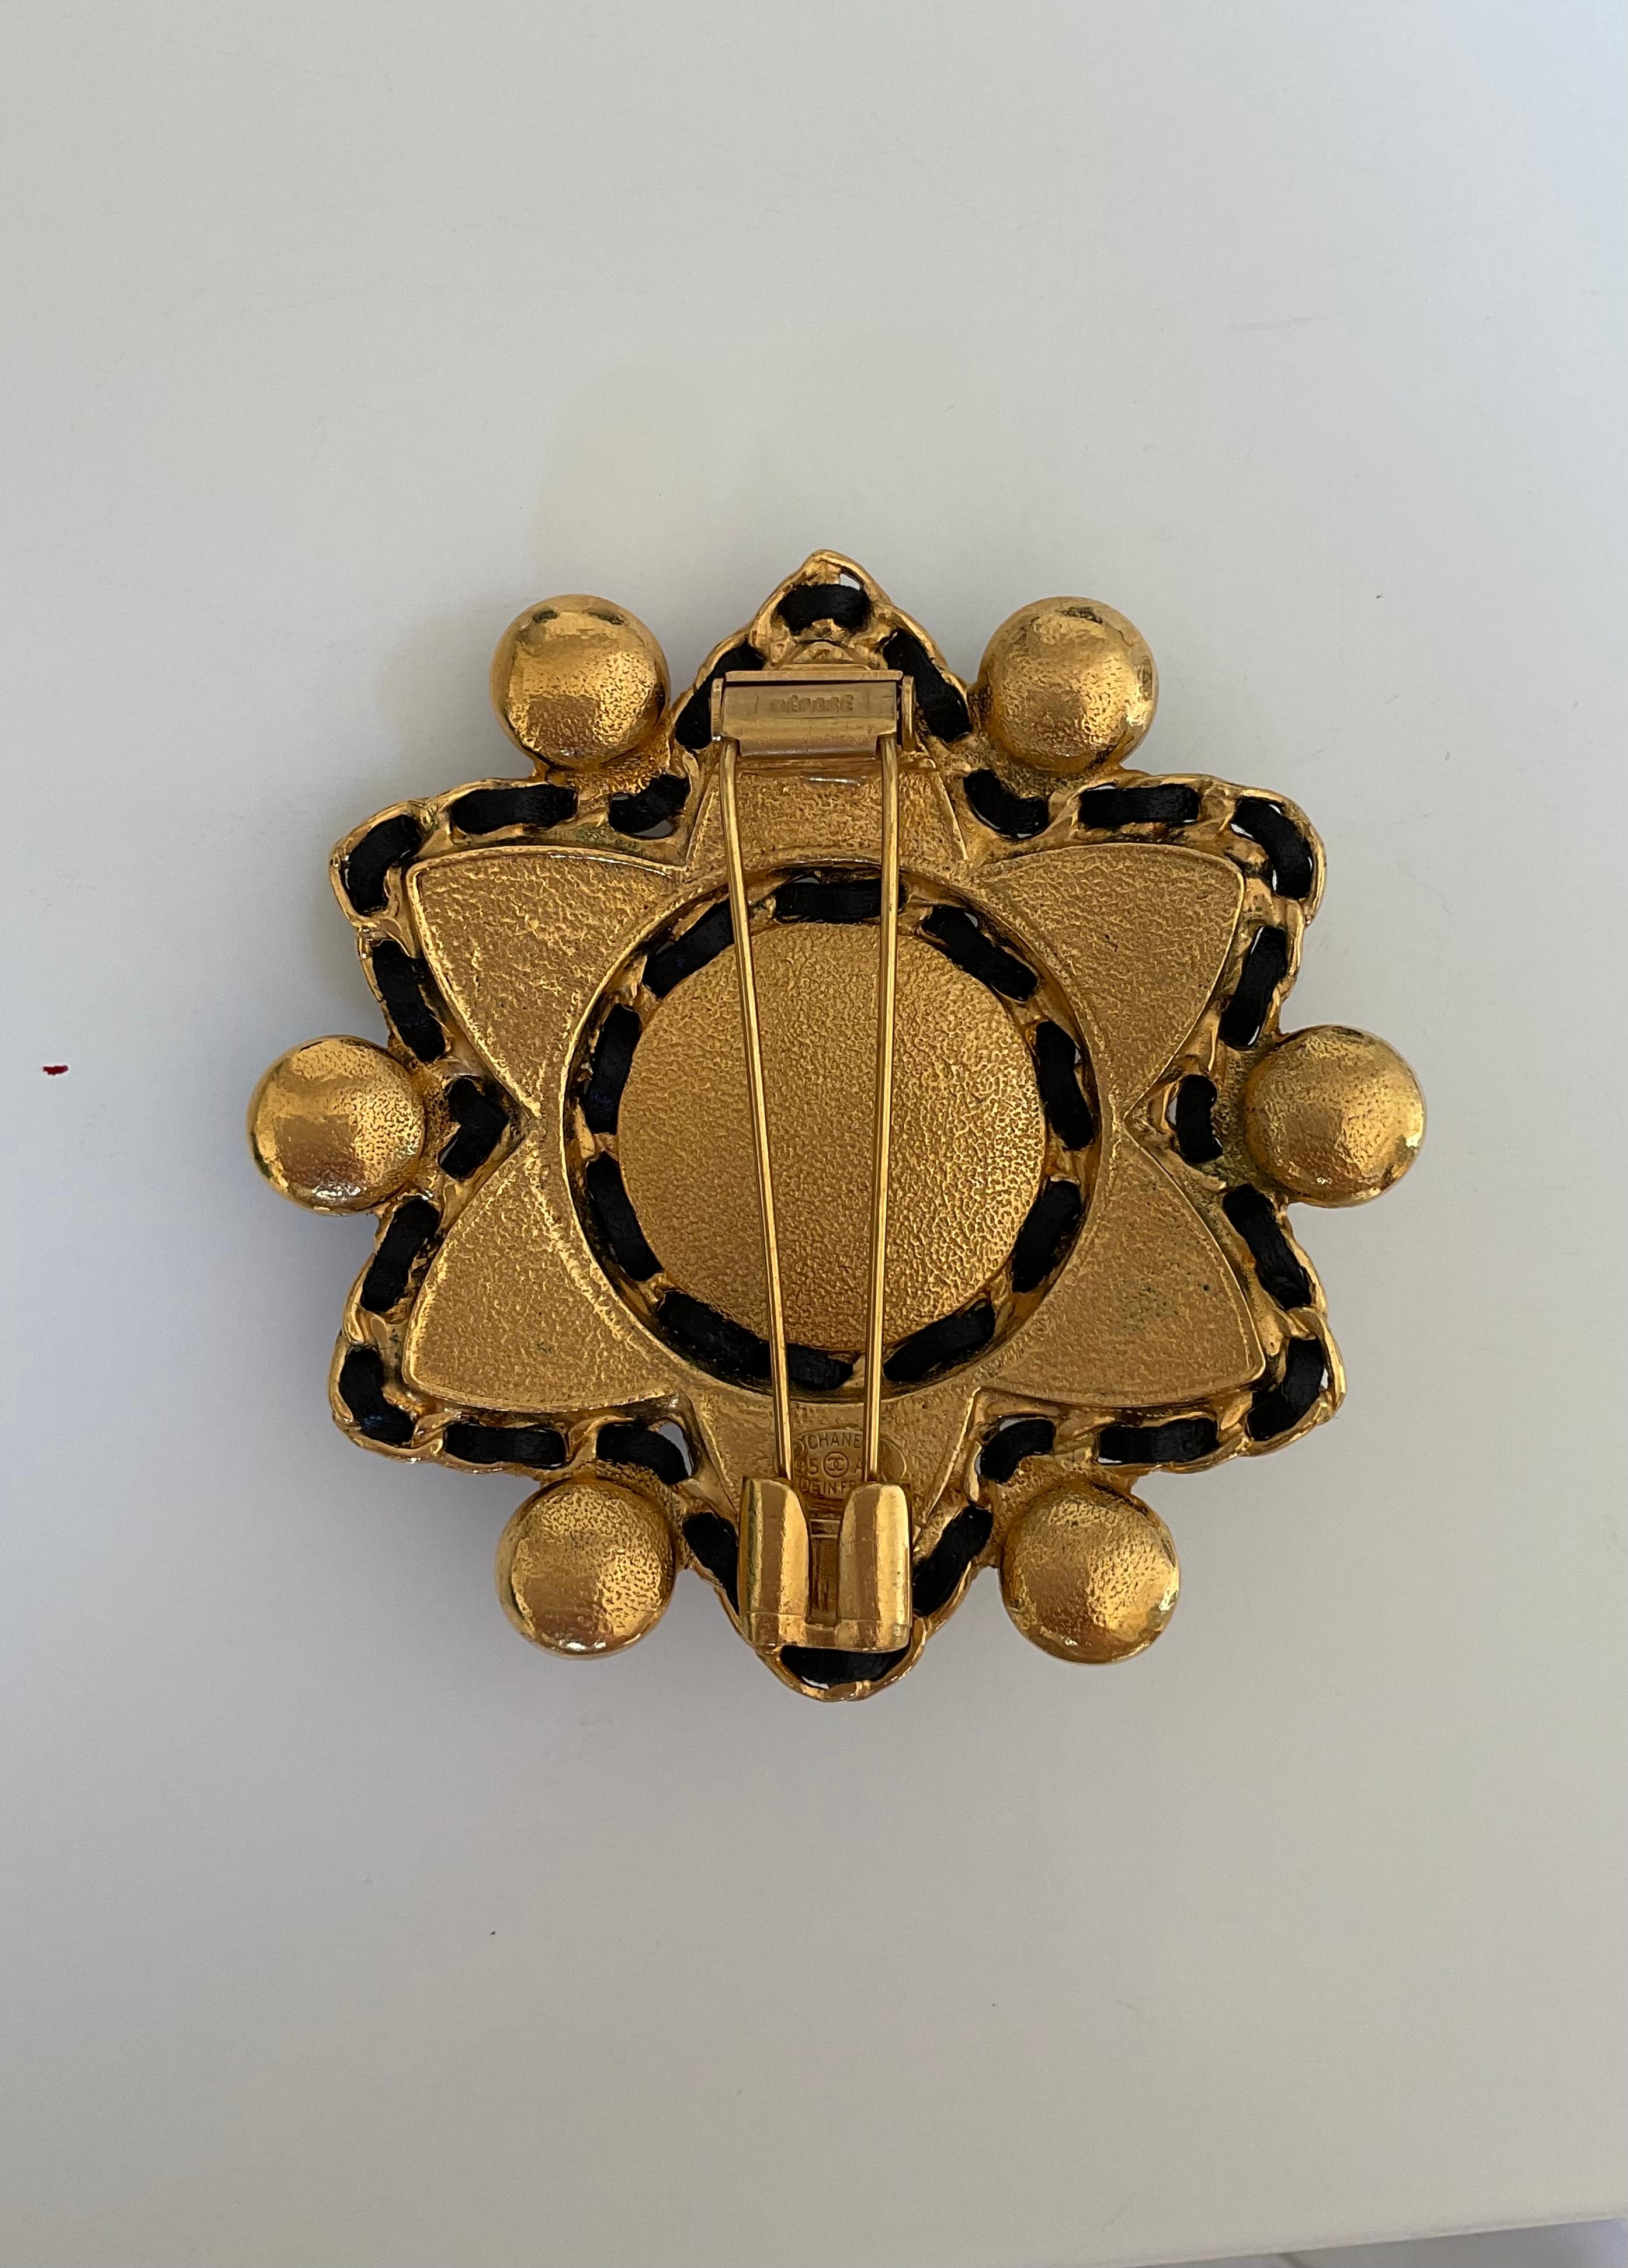 This exceptionnal Vintage CHANEL is a star shaped brooch. It is composed at its centre of a round burgundy stone in “pate de verre” made in gold plate. Surrounding the stone, there are six semi-precious stones (onyx, jasper, lapiz, etc.) in